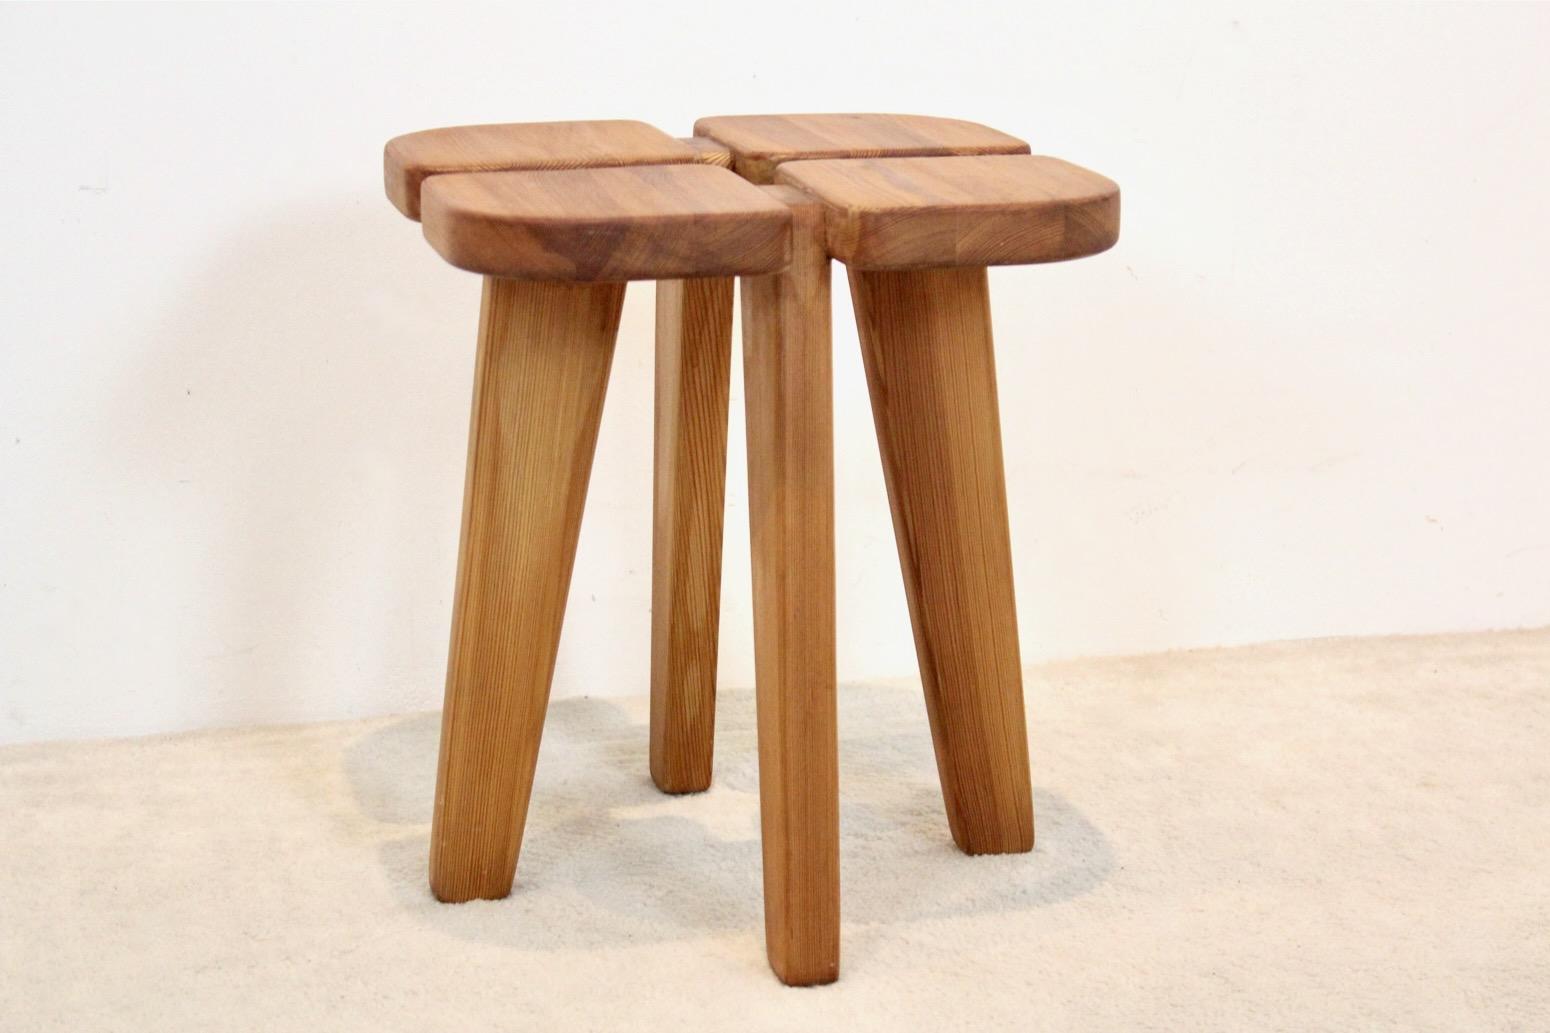 Stunning ‘Apila’ Stool designed by Rauni Peippo and manufactured by Stockmann Orno, Finland 1960. This stool is made of solid pine and has amazing shapes. The stool looks a bit like a lucky clover standing in the field. Very refined and playful